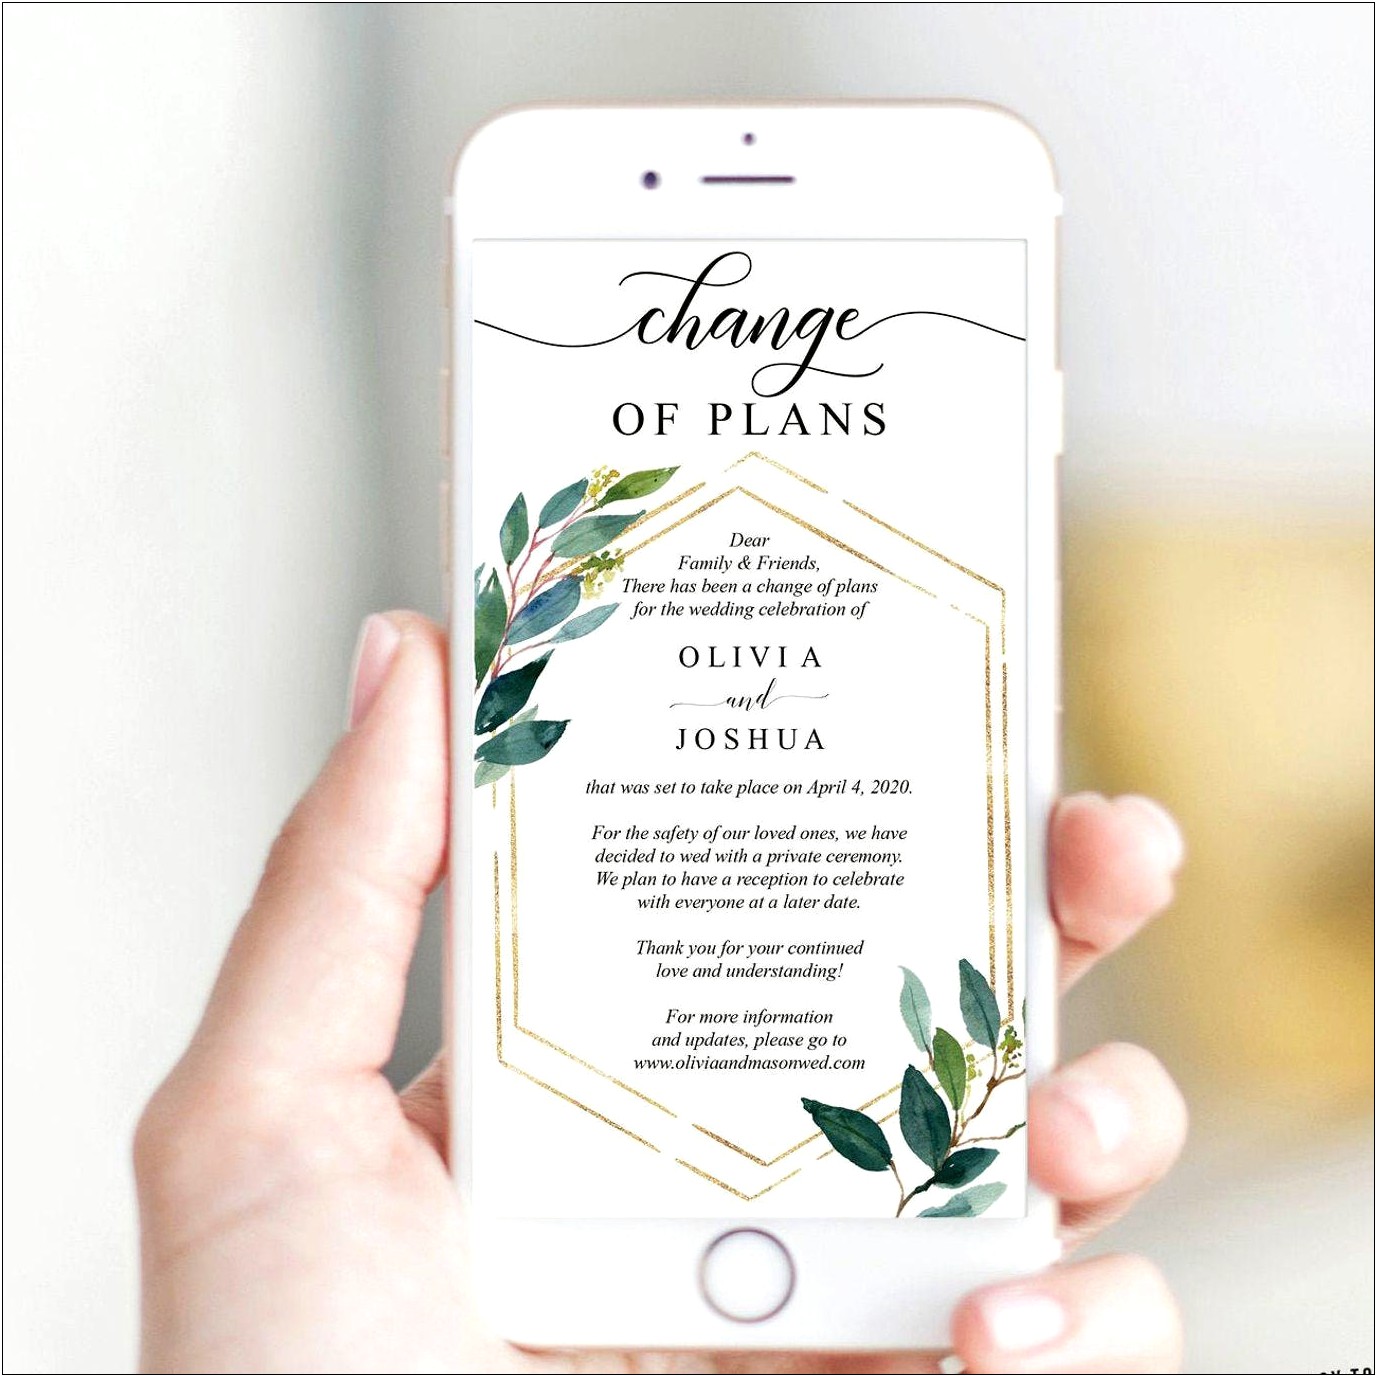 Changing Wedding Start Time After Sending Invitations